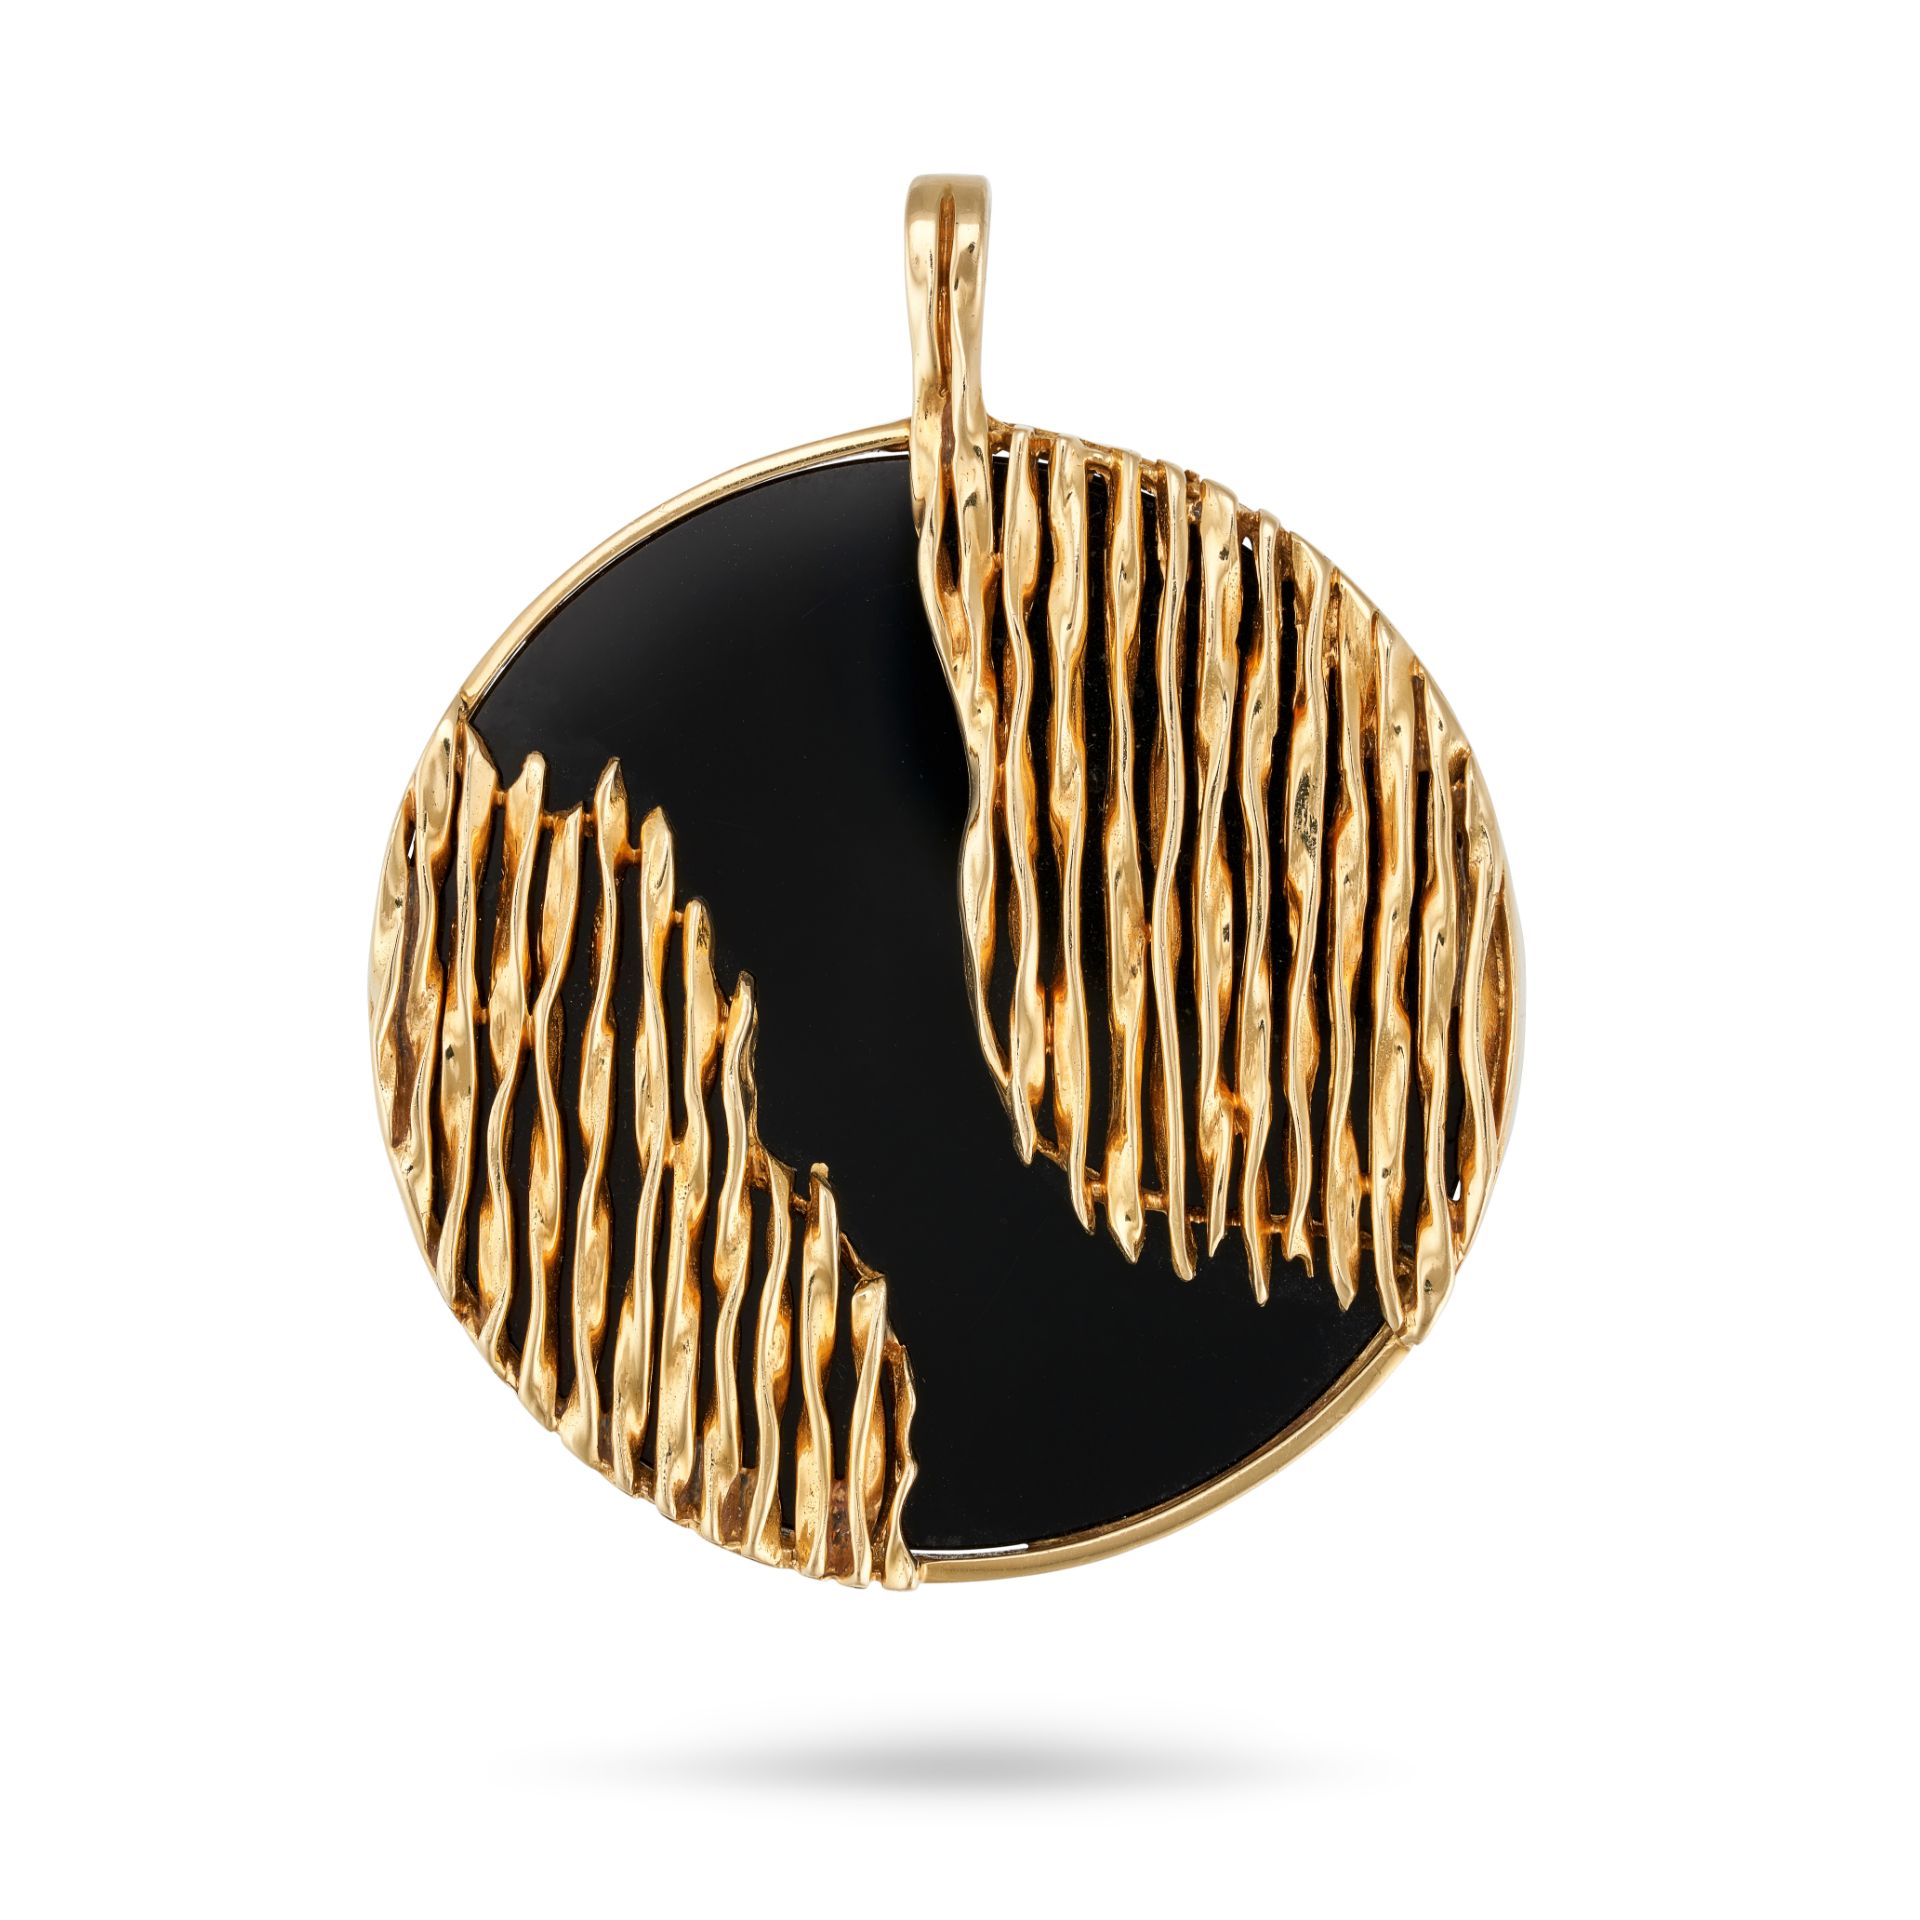 KUTCHINSKY, A MODERNIST ONYX PENDANT, 1975 in 18ct yellow gold, the circular pendant comprising a...